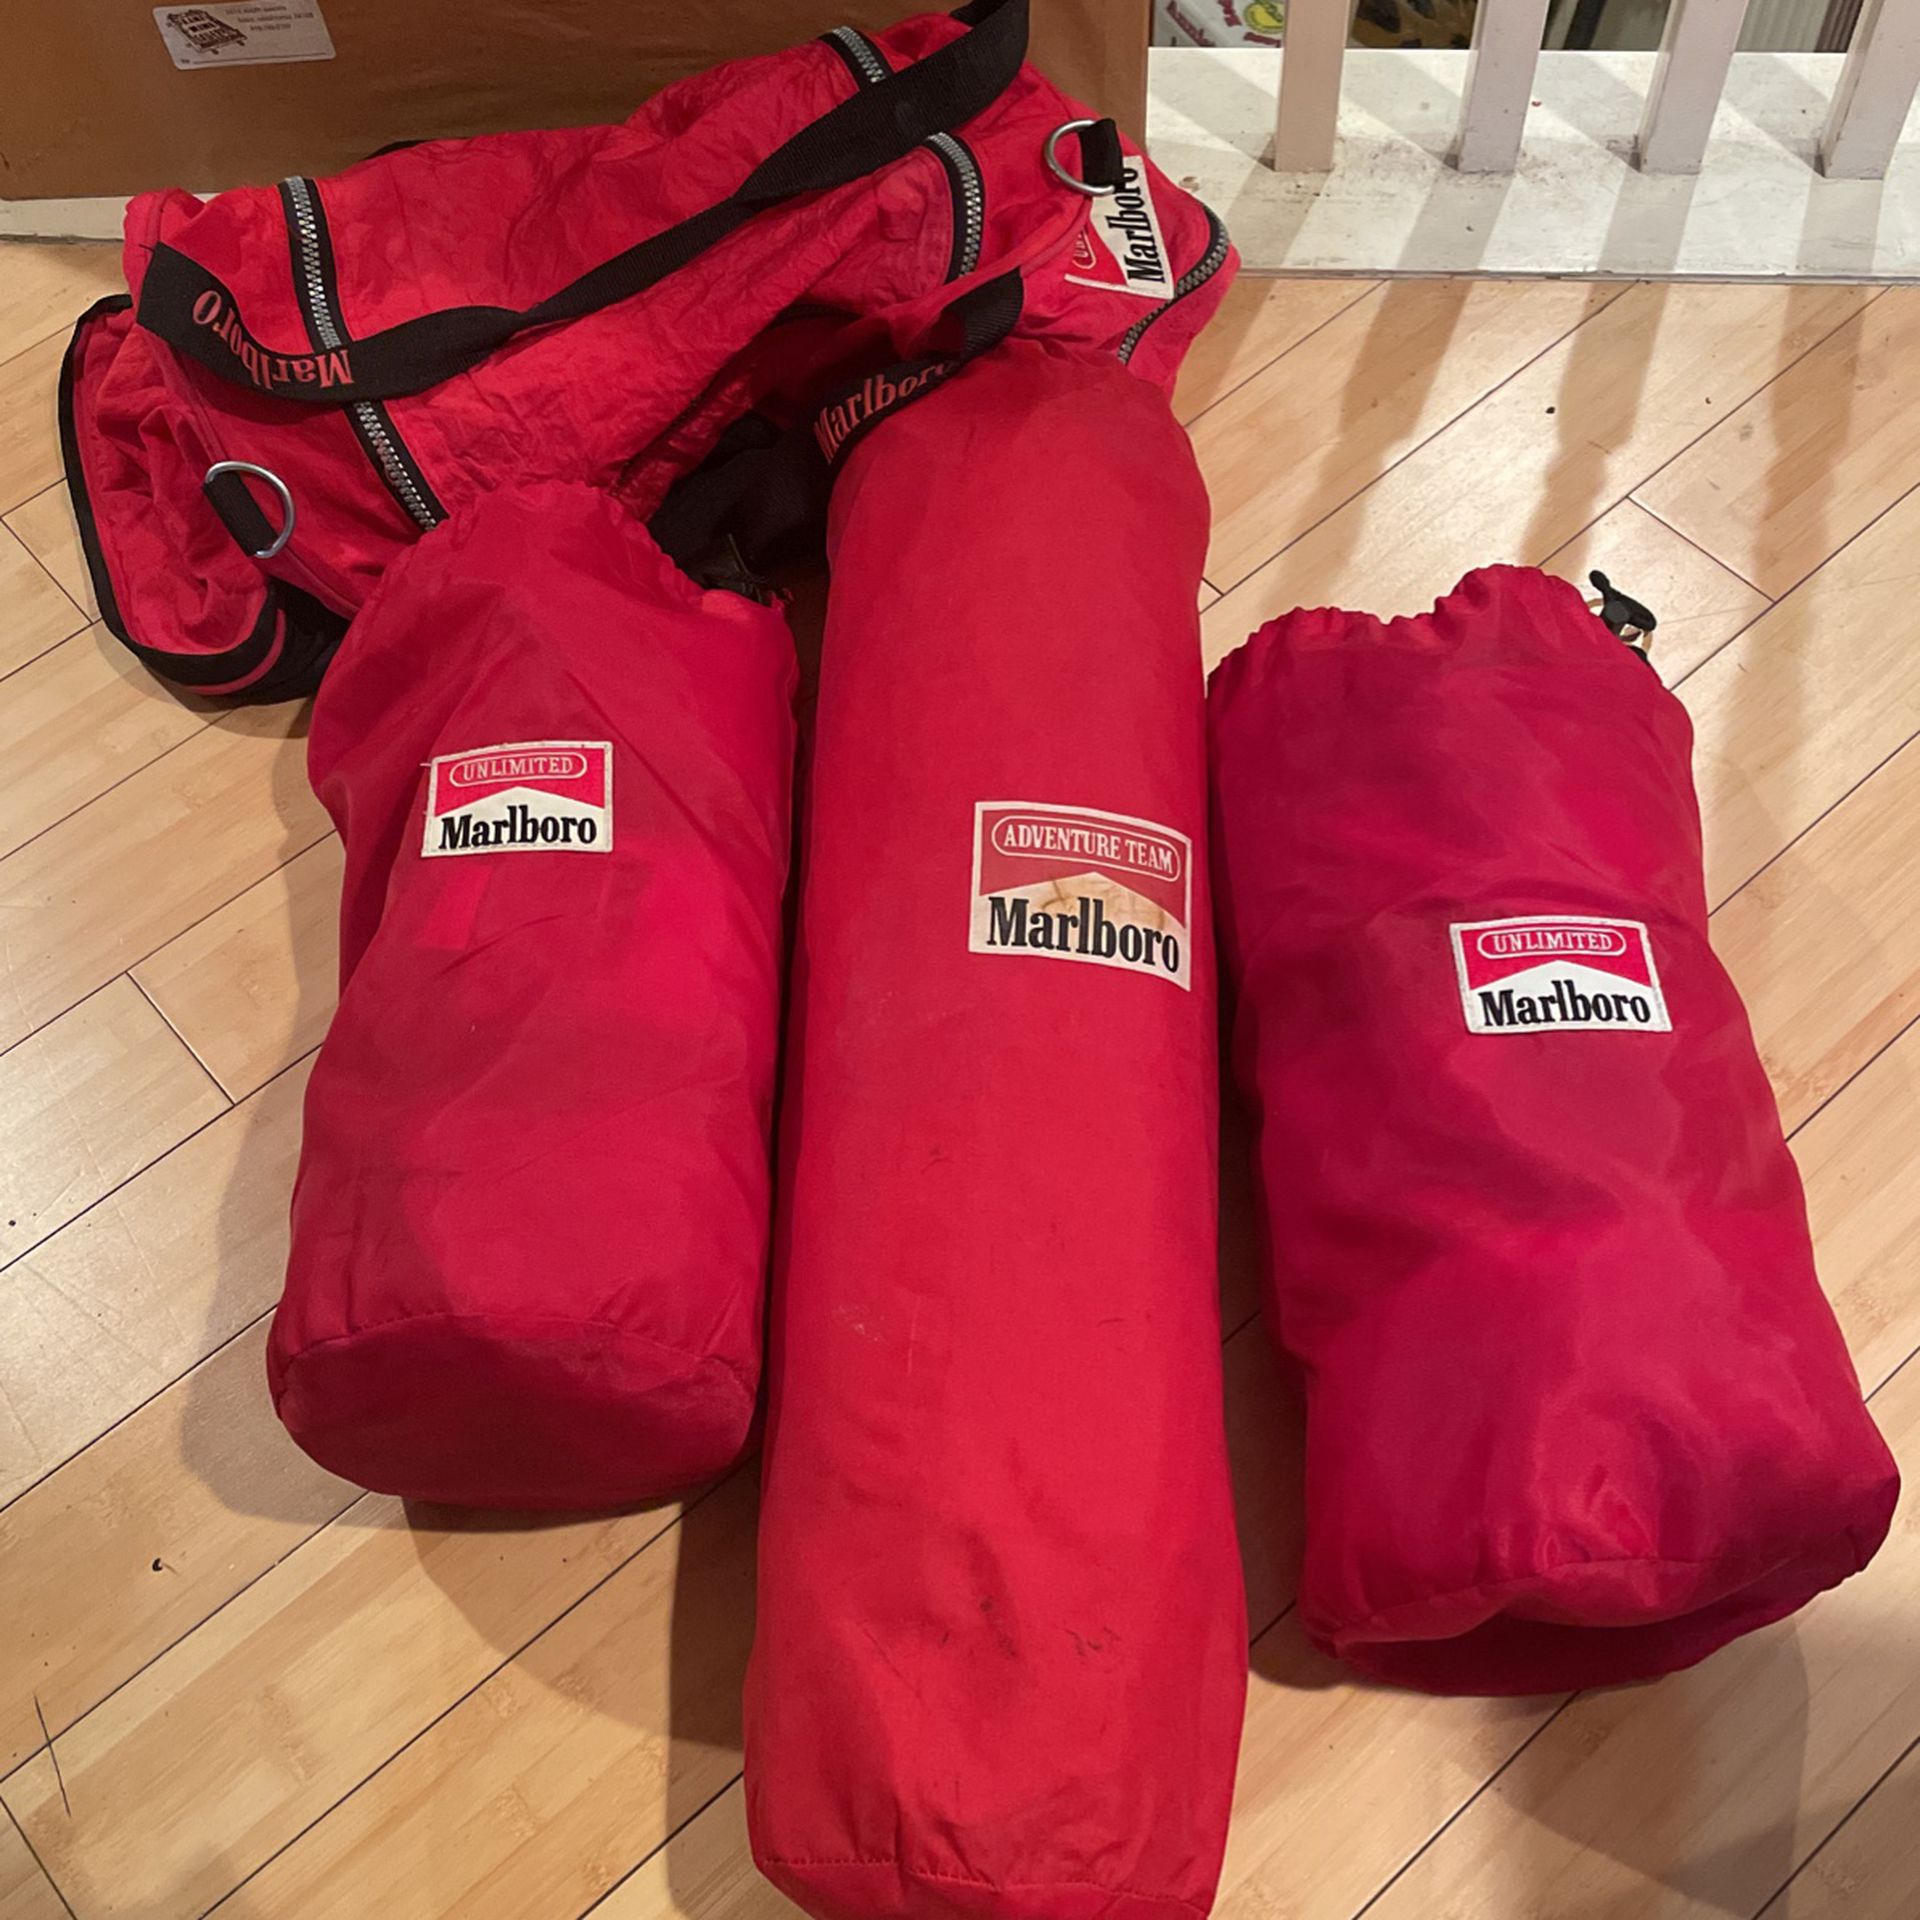 Marlboro Tent And Two Sleeping Bed And Duffel Bags All Tag With Marlboro Unlimited 